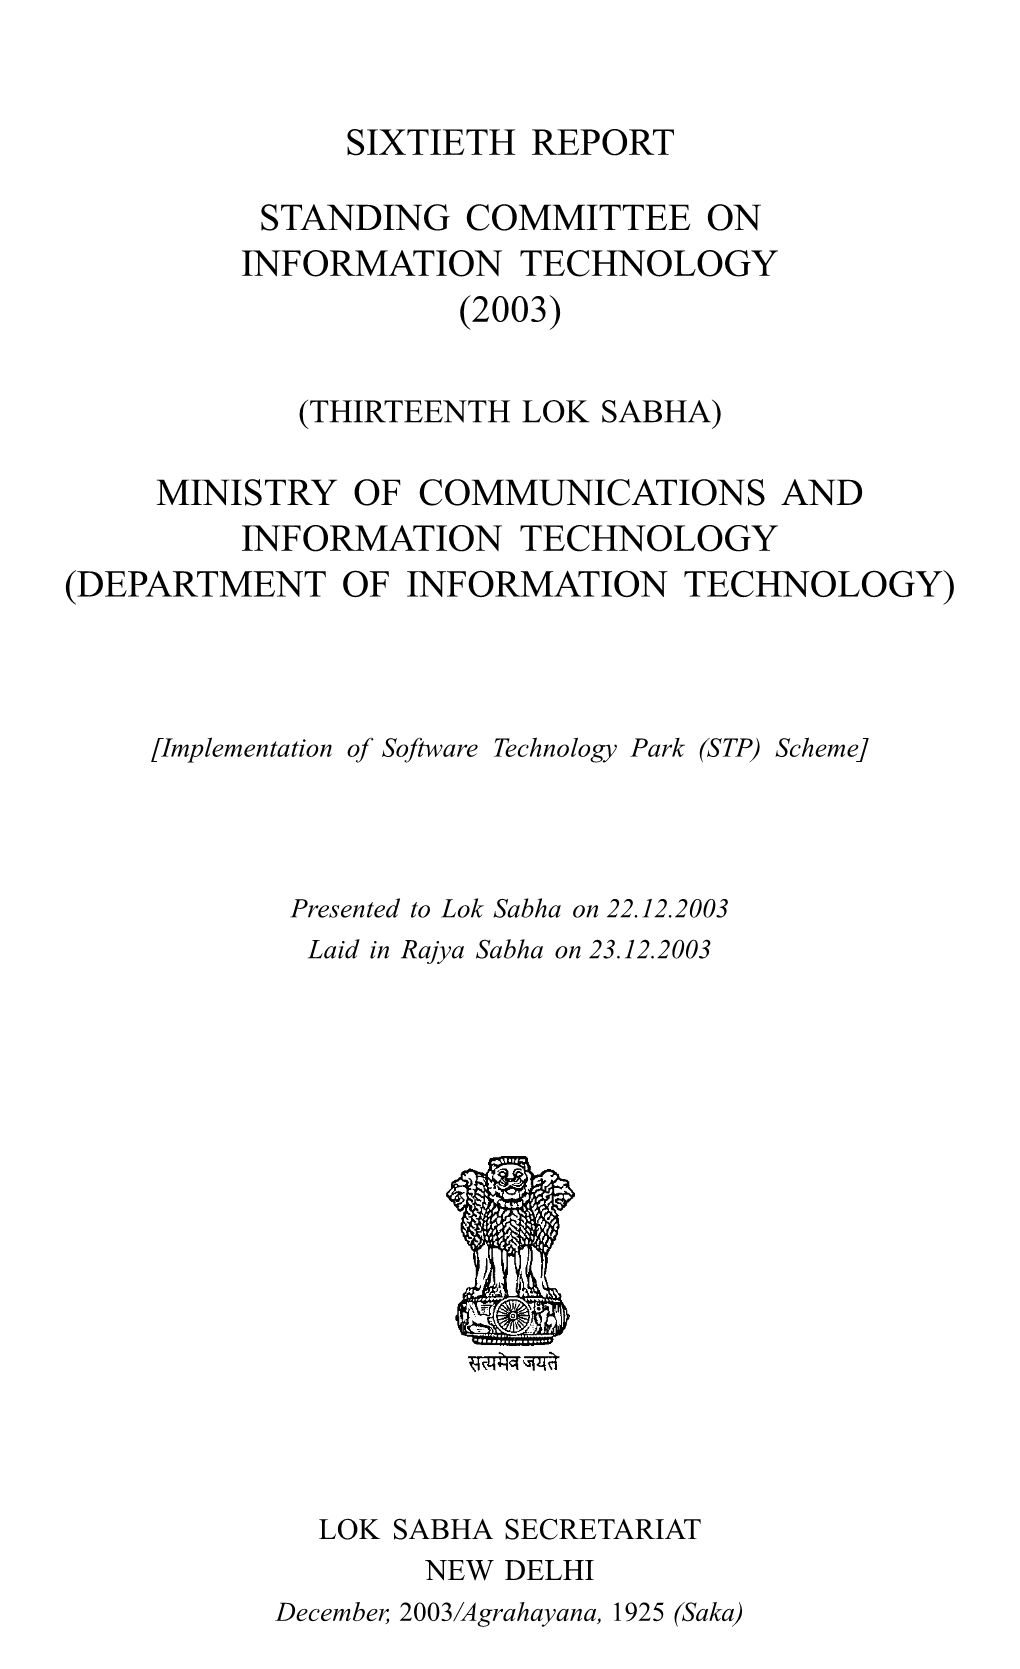 Sixtieth Report Standing Committee on Information Technology (2003)